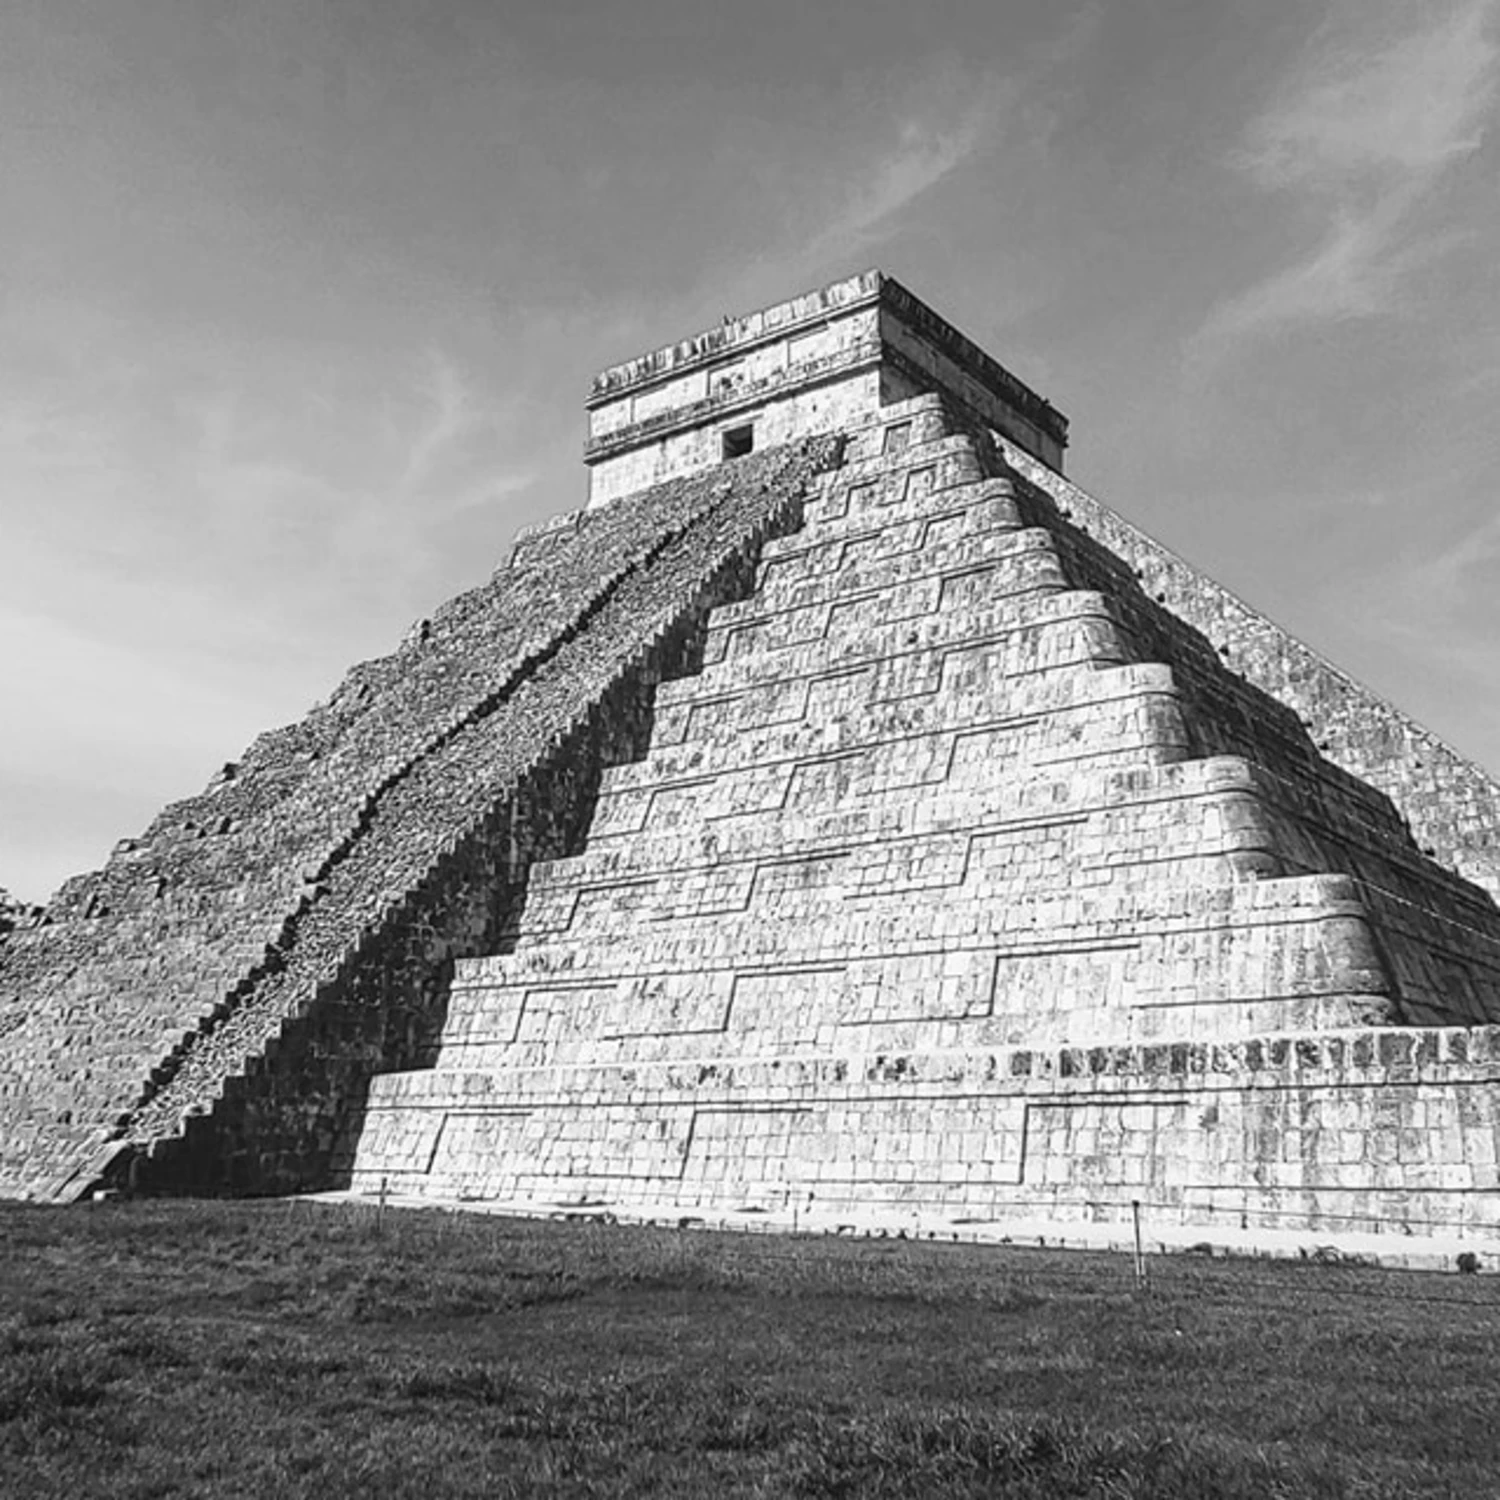 View of a pyramid